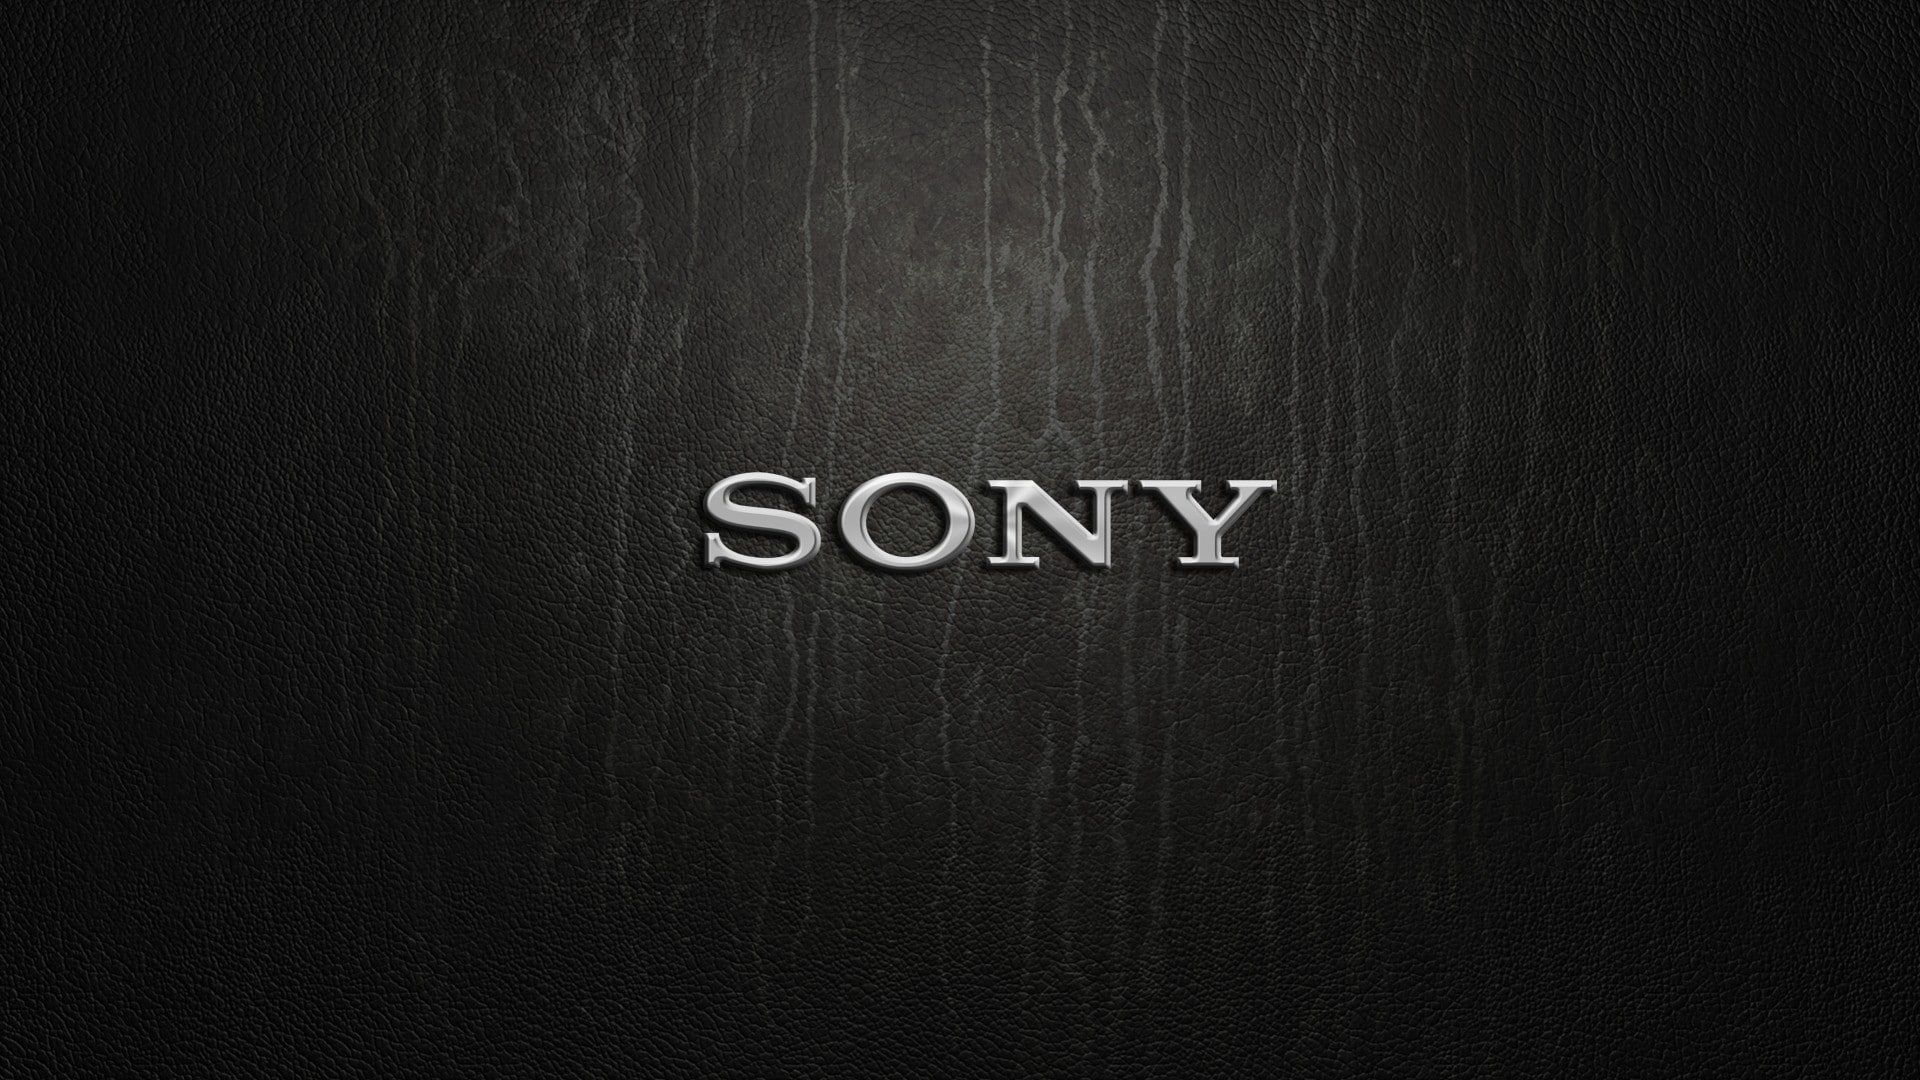 Sony HD Wallpaper (74+ images)